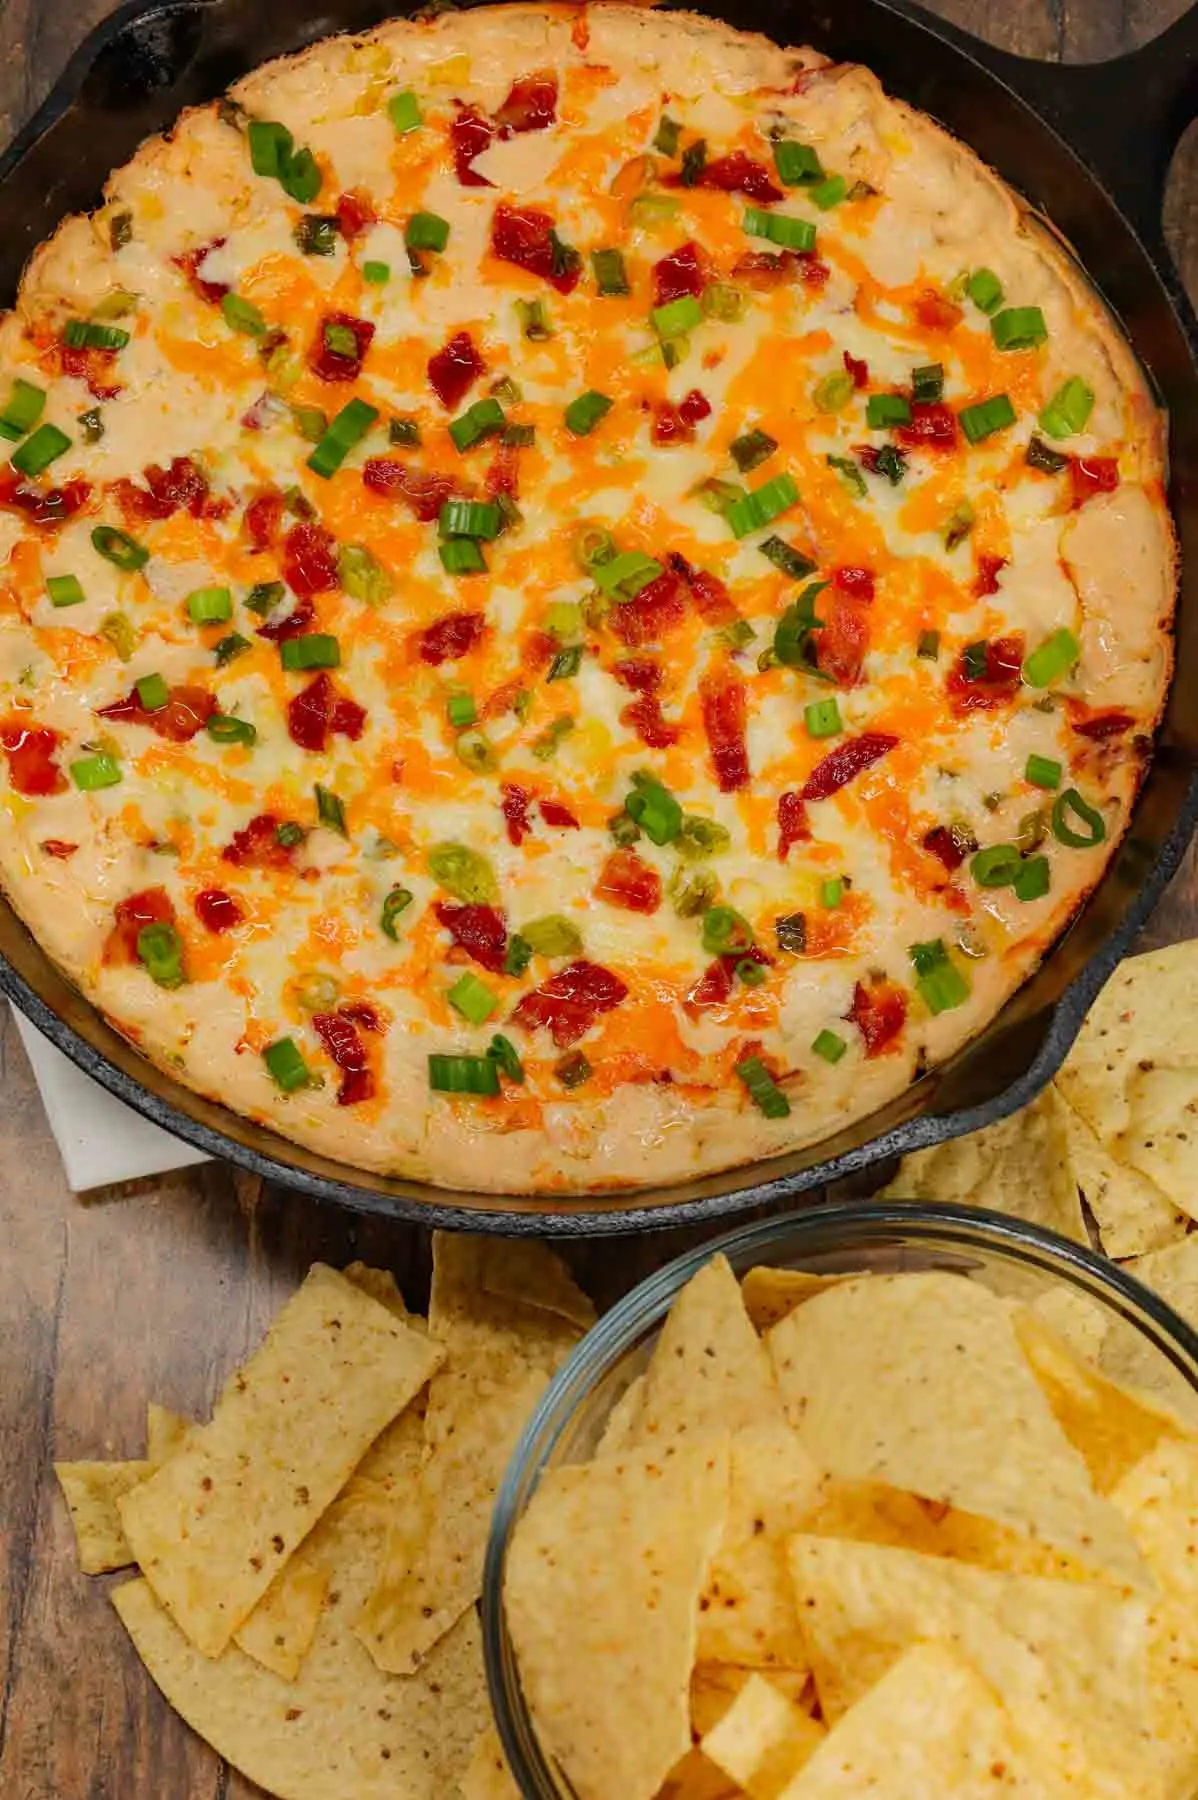 Cracked Out Corn Dip is a delicious hot dip recipe loaded with cream cheese, corn, sour cream, ranch dressing mix, bacon, green onions, cheddar cheese and mozzarella cheese.